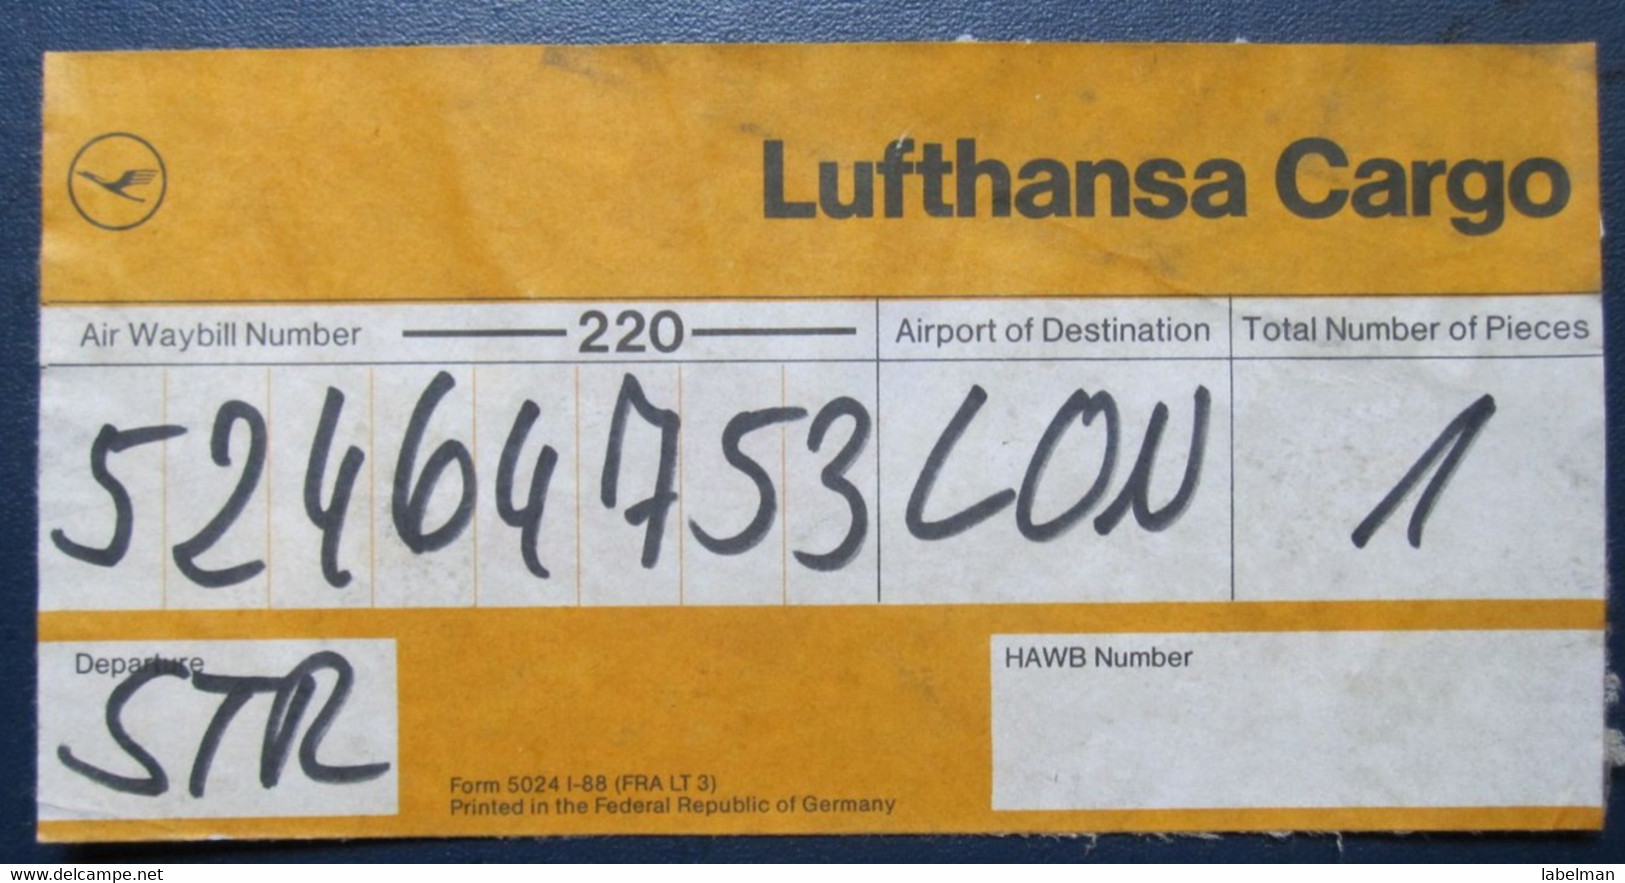 LUFTHANSA GERMANY CARGO CARD TICKET AIRWAYS AIRLINE STICKER LABEL TAG LUGGAGE BUGGAGE PLANE AIRCRAFT AIRPORT - Europe